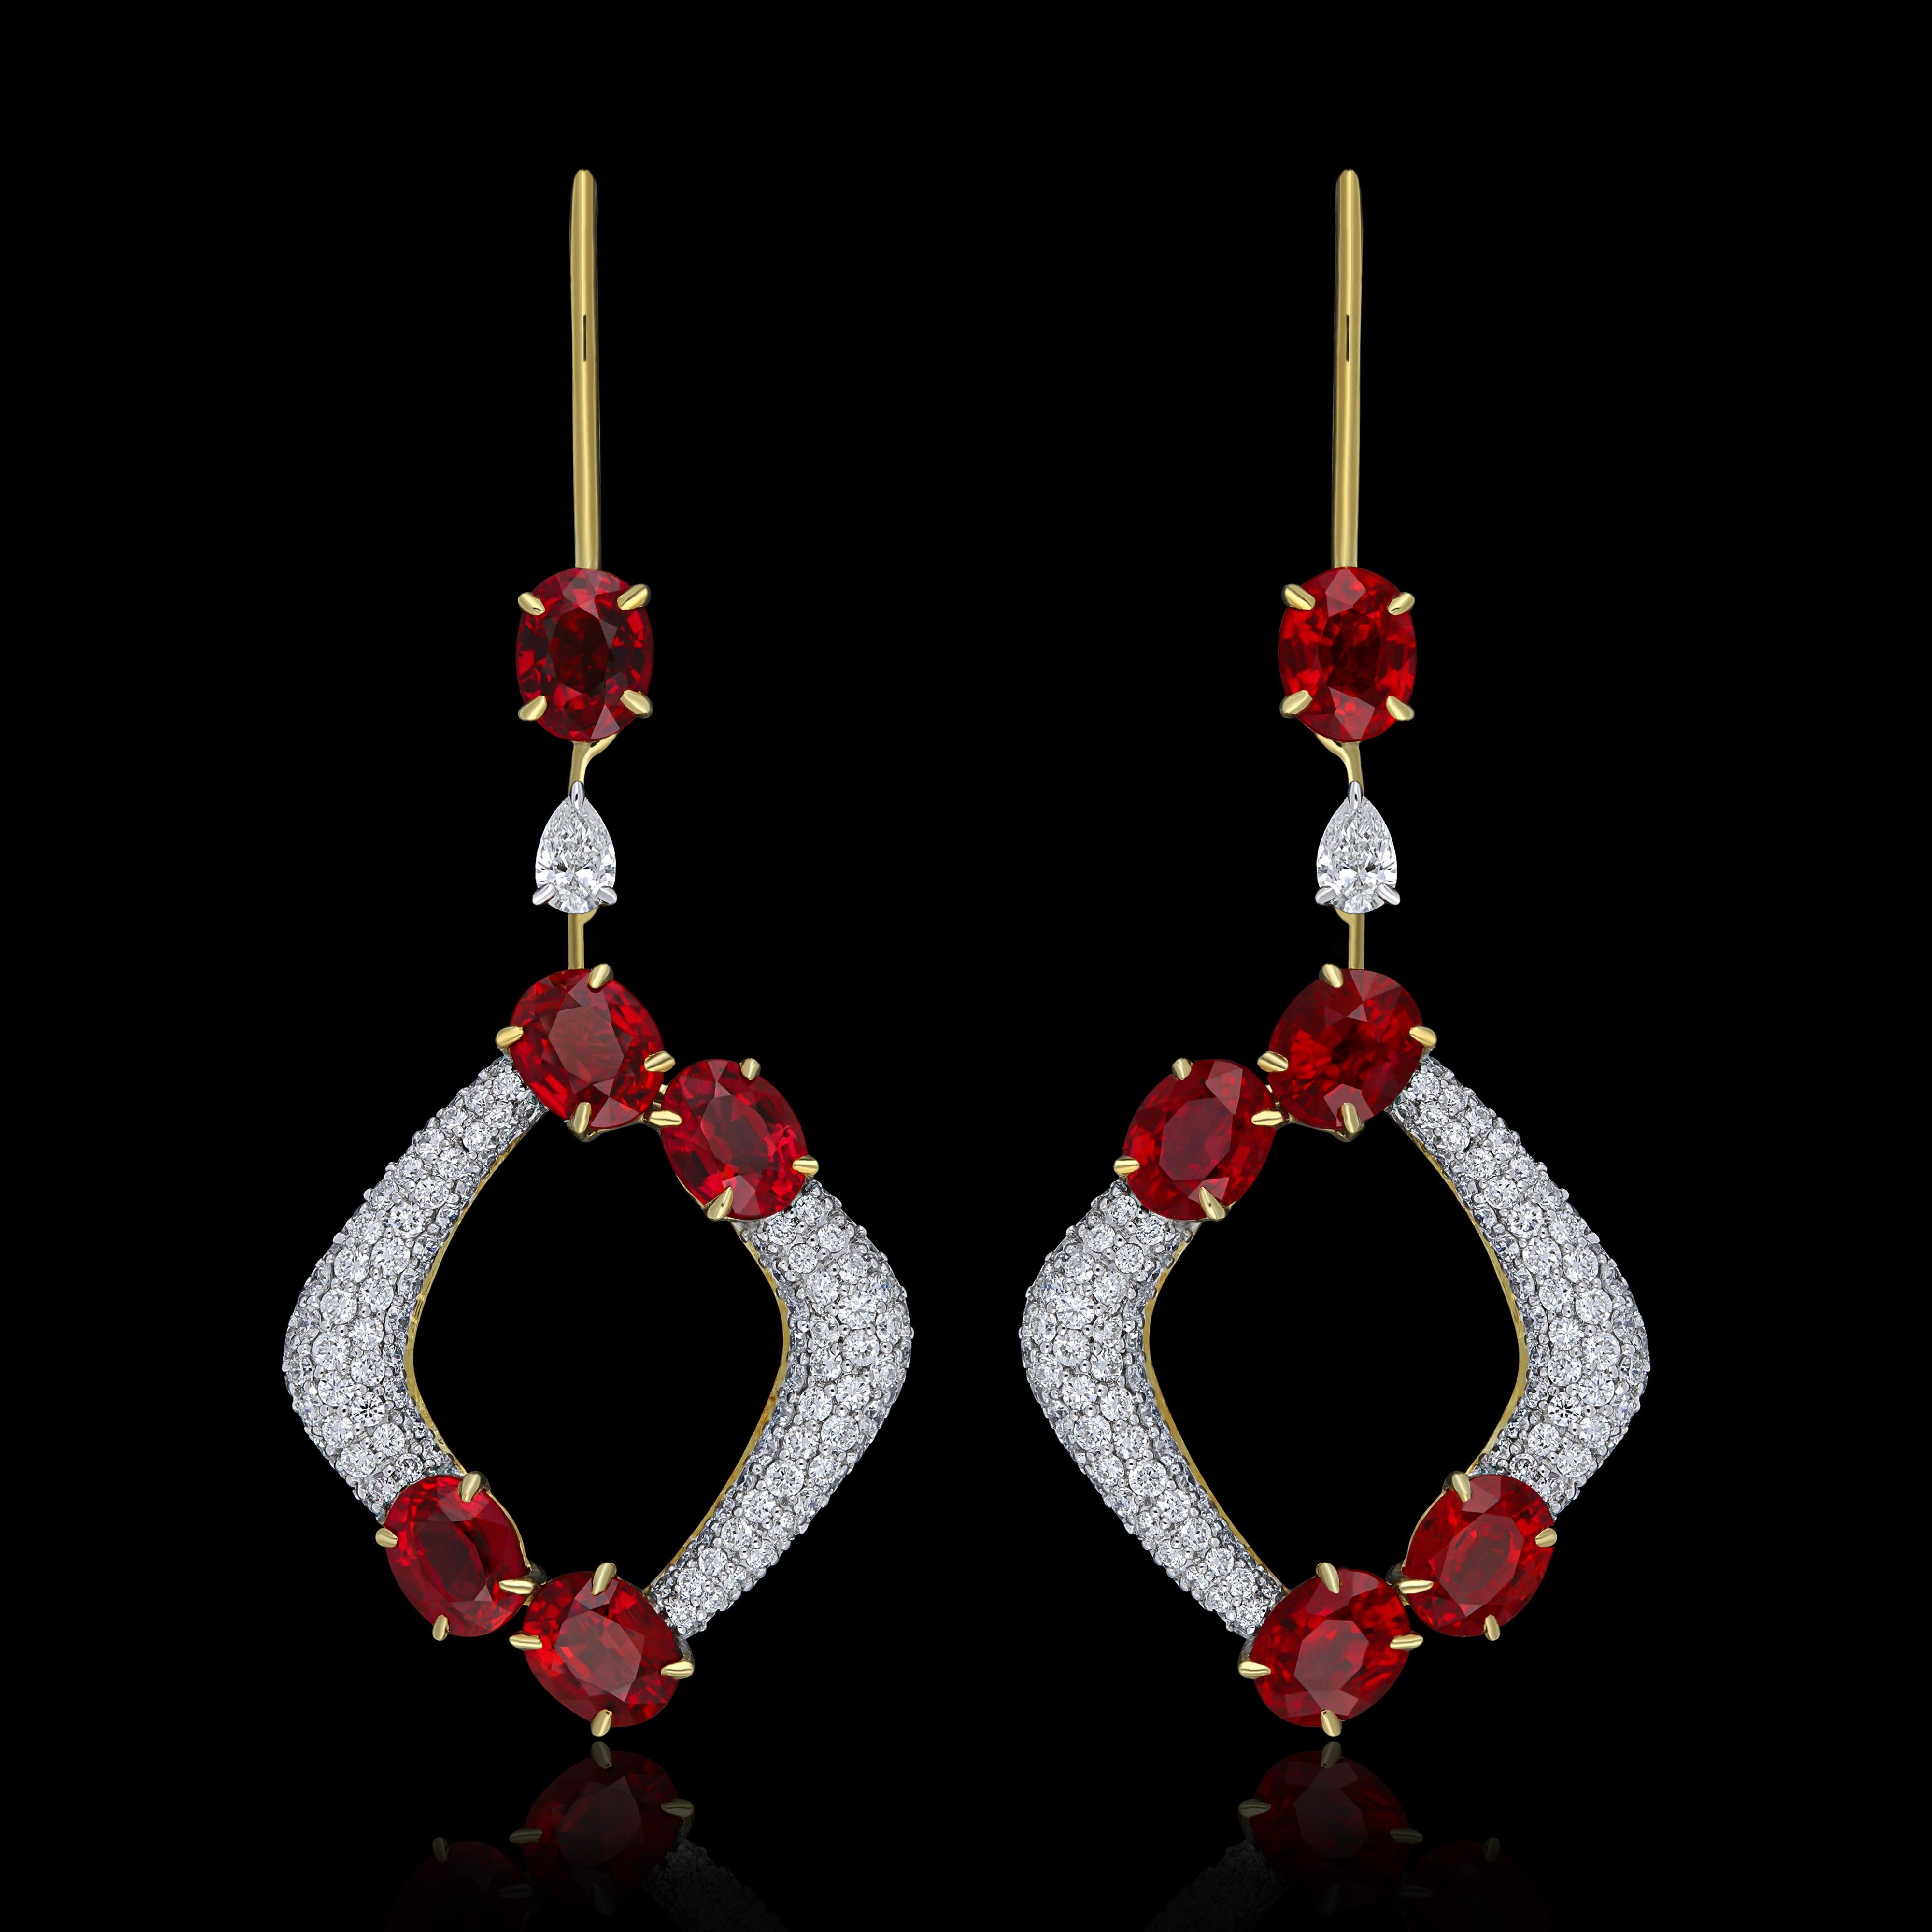 Elegant and exquisitely detailed 18 Karat White Gold Earring, center set with 4.45Cts .Oval Blood Red Ruby Burma and micro pave set Diamonds, weighing approx. 0.97Cts Beautifully Hand crafted in 18 Karat White Gold.

Stone Detail:
Ruby Burma: